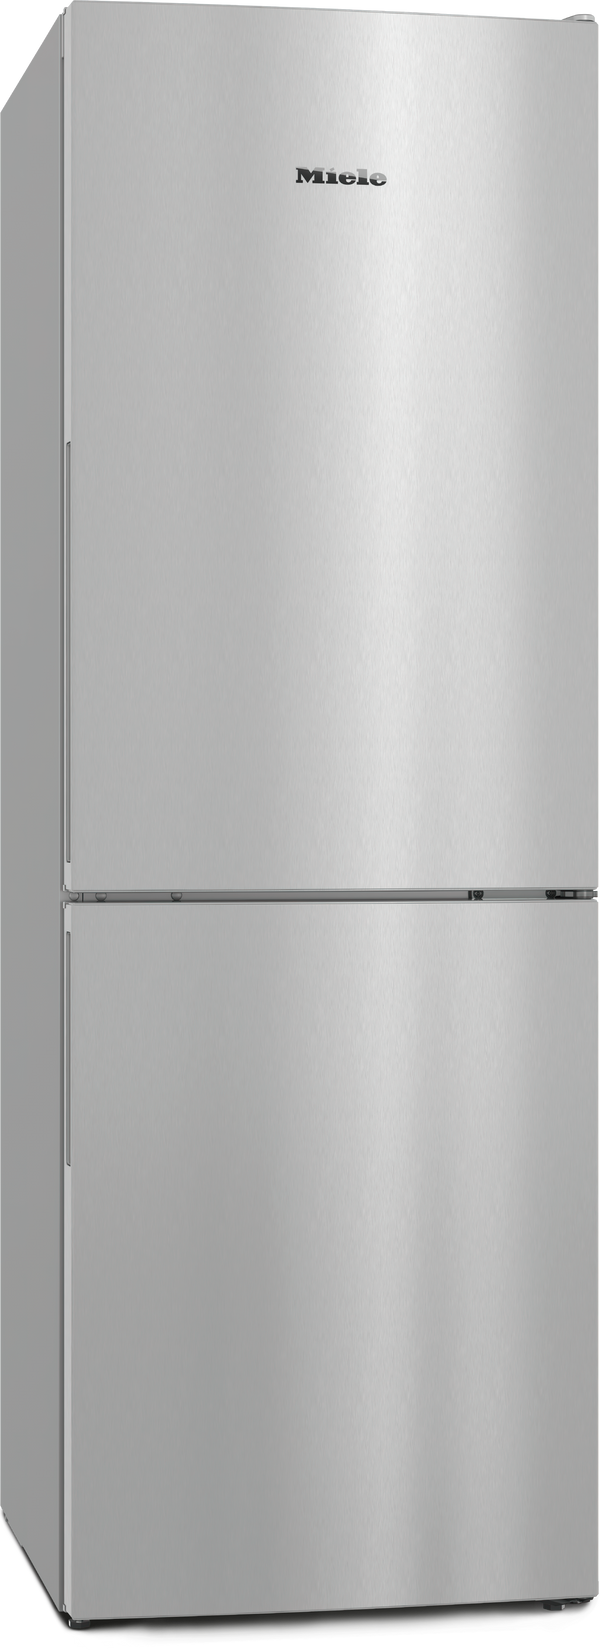 Miele Free-Standing Fridge-Freezer KD 4050 E | Climate Control Food Drawers | Dual Temperature Zones